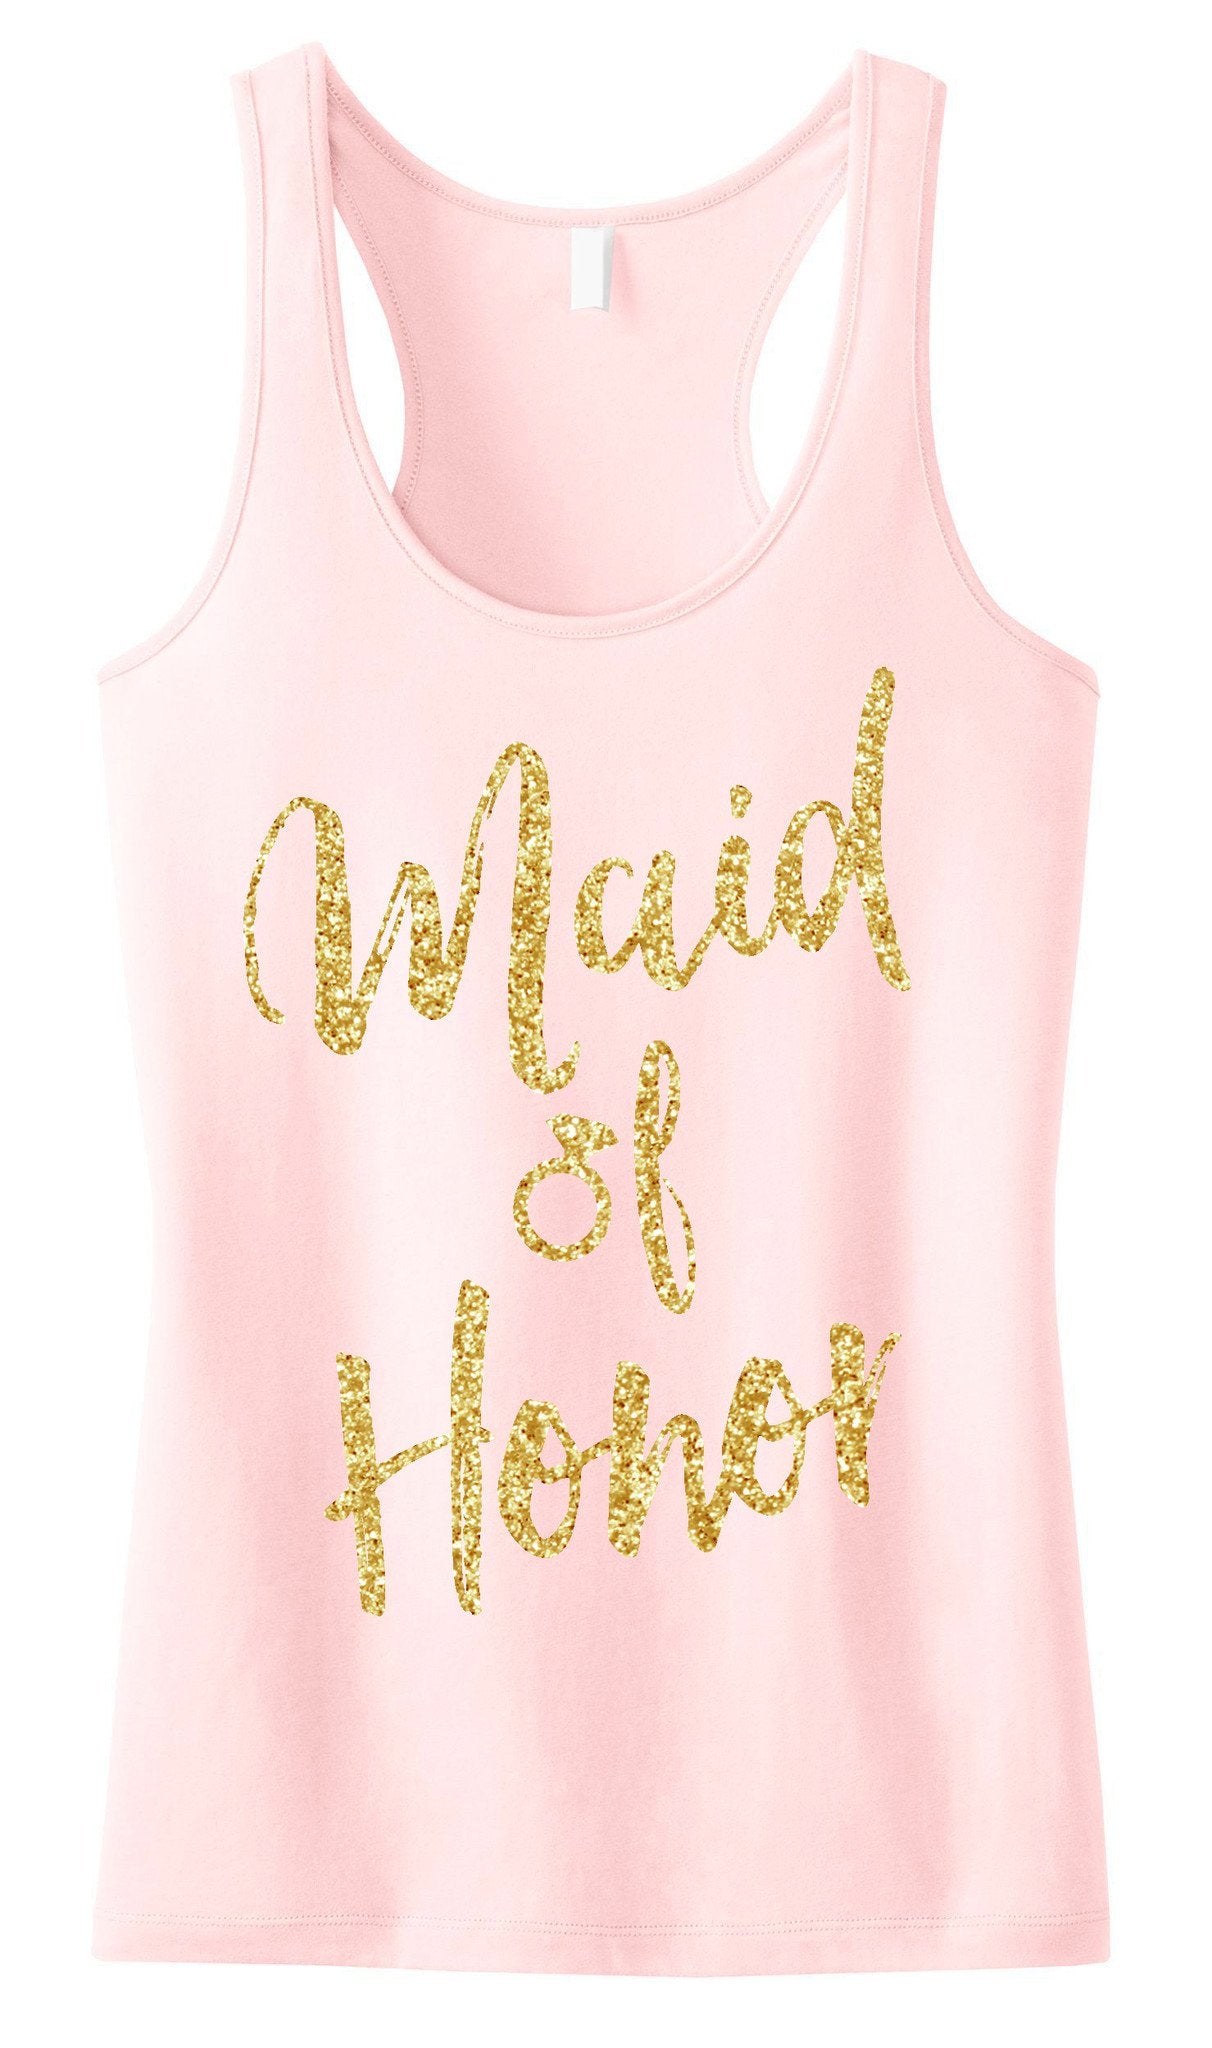 Maid of Honor Script Tank Top with Gold Glitter -